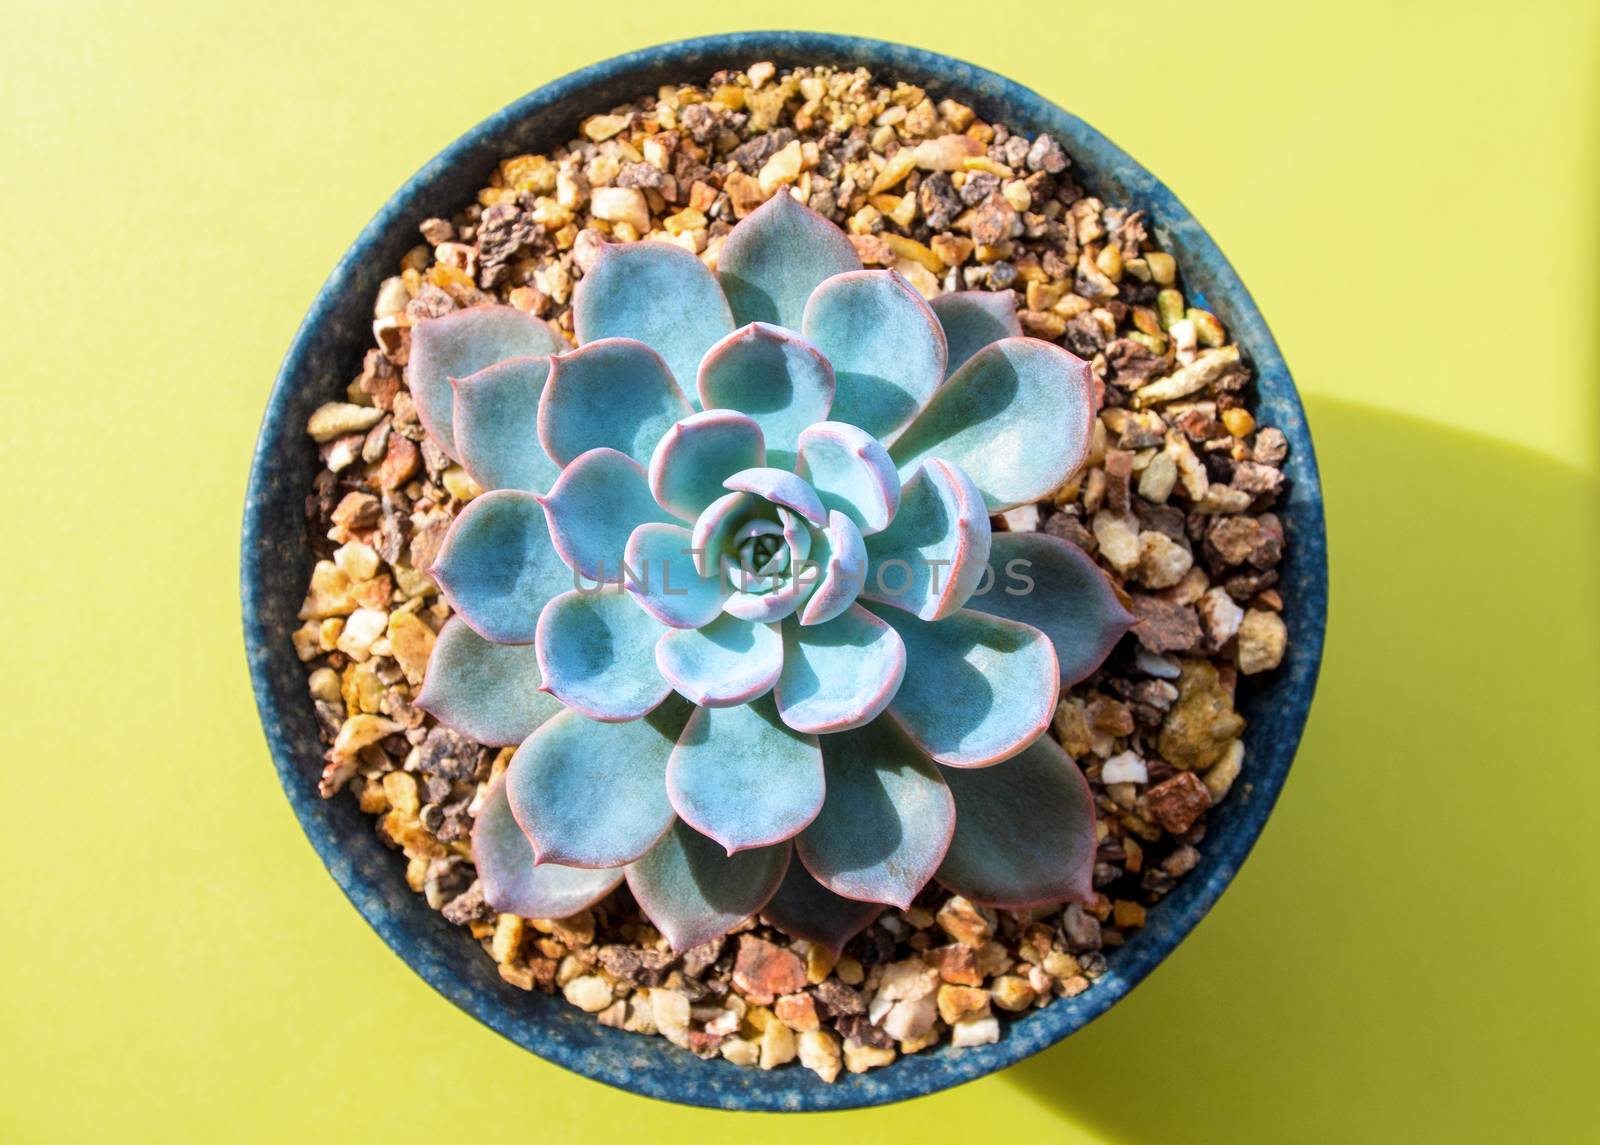 Succulent plant Echeveria white wax on silver blue leaves of Echeveria peacockii Subsessilis in the ceramic pot